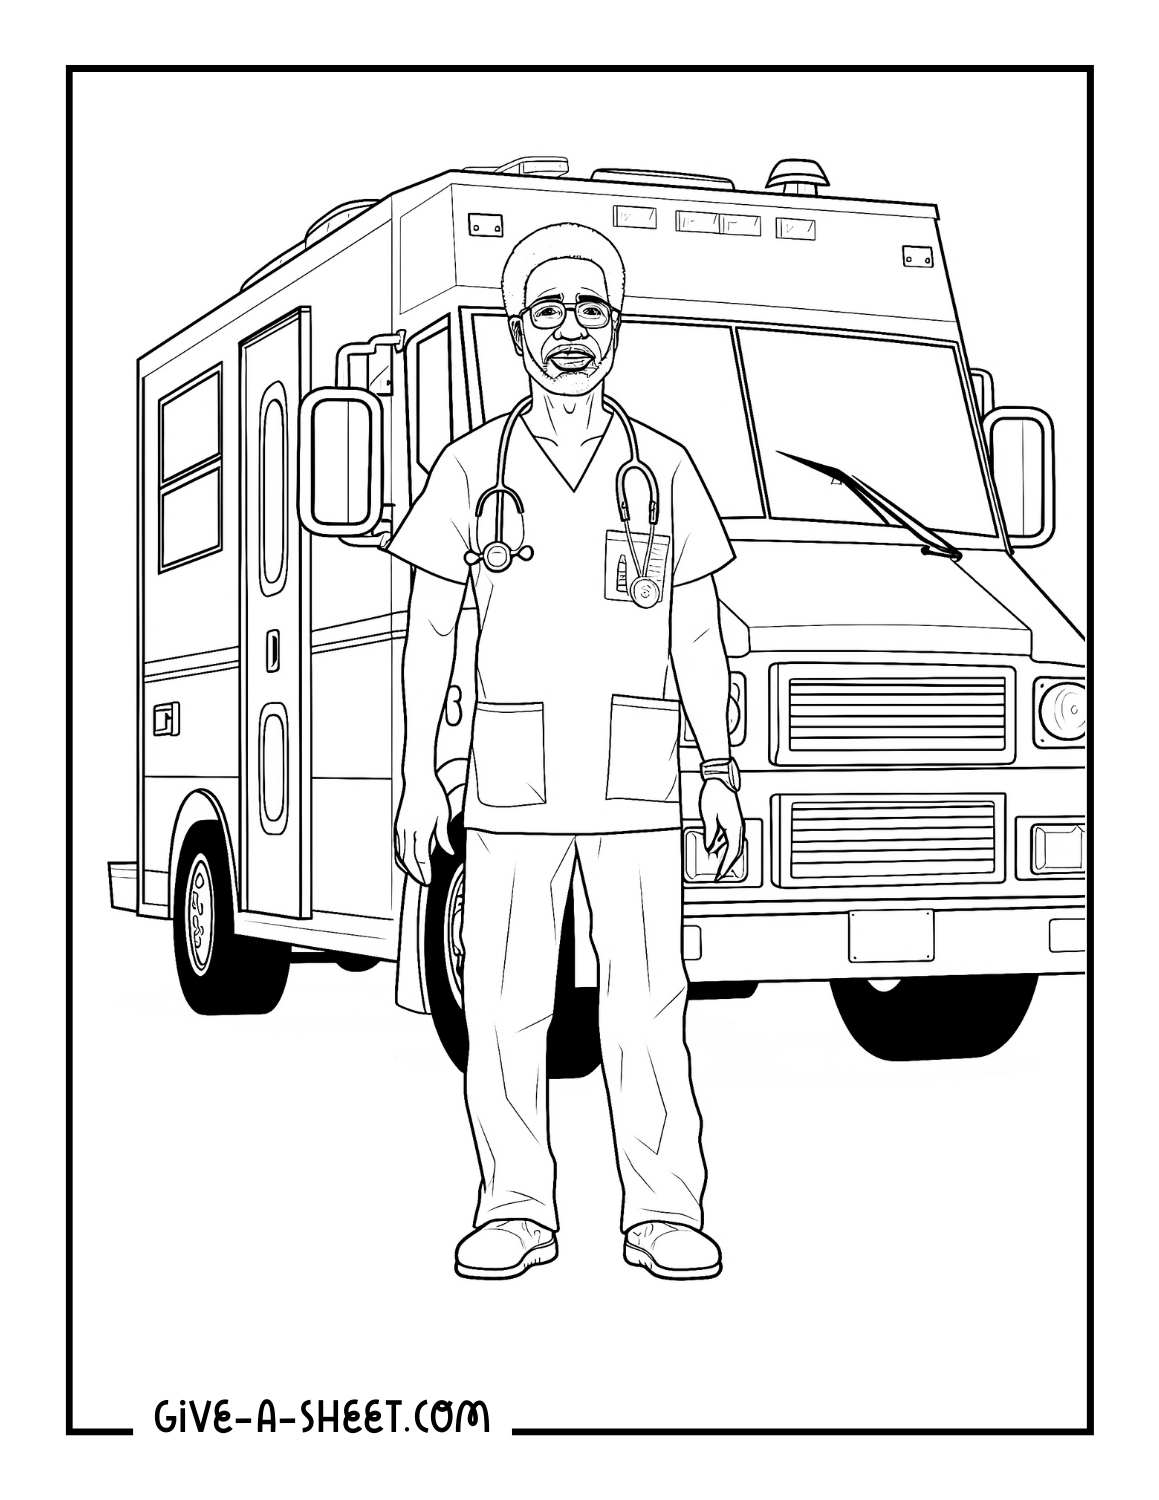 A male doctor with an ambulance.